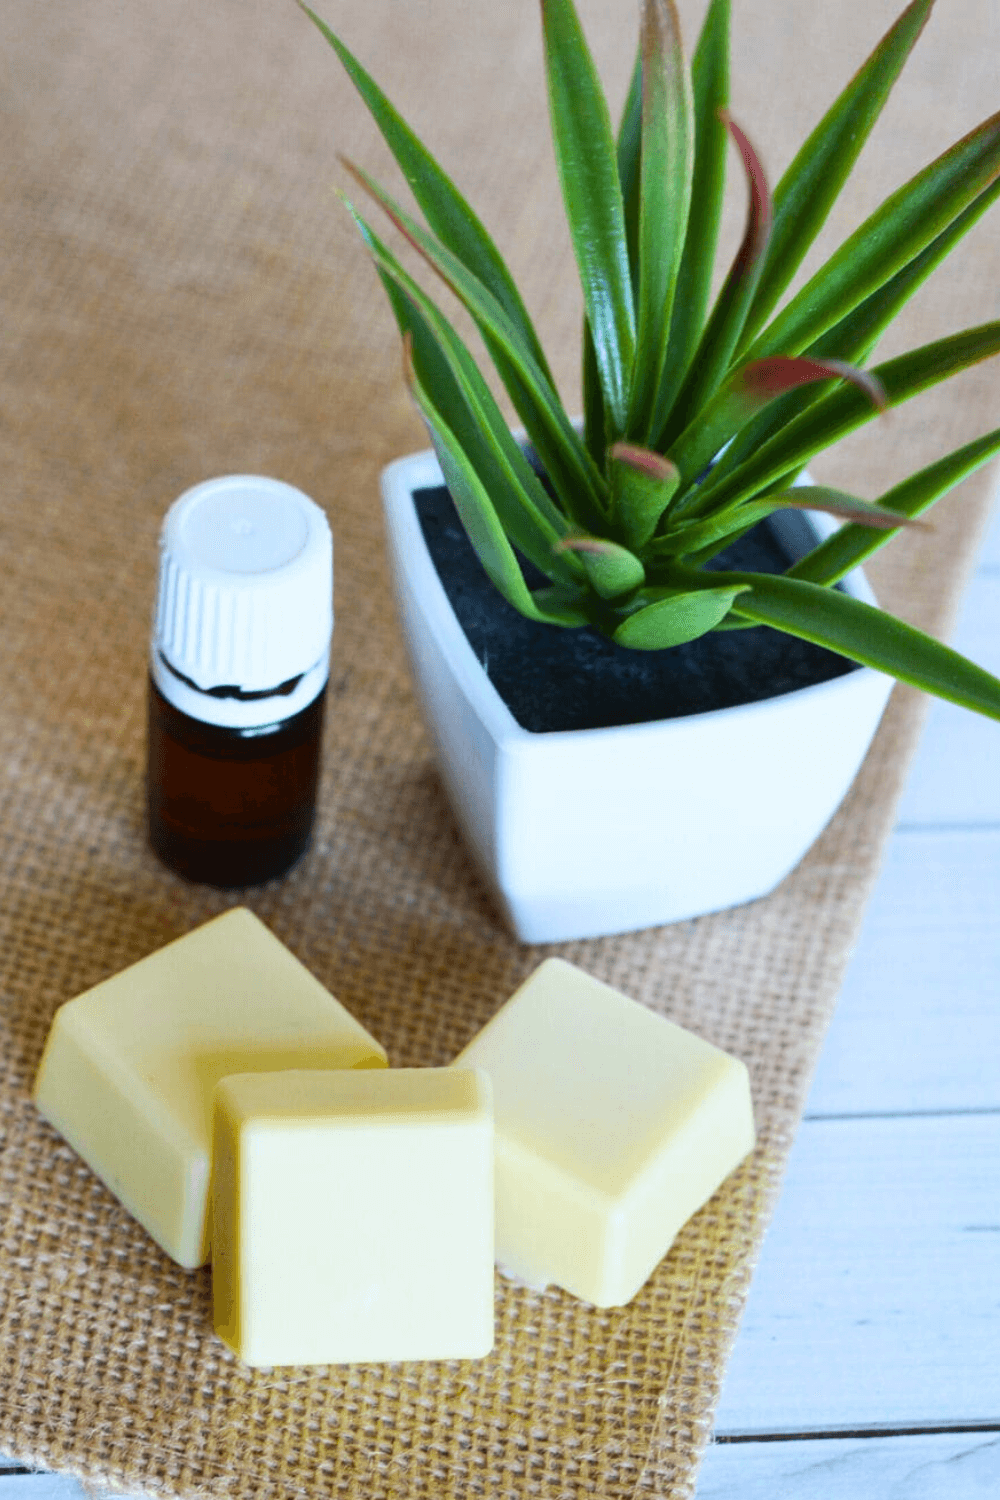 Homemade Lotion Bars beside a small bottle of essential oil